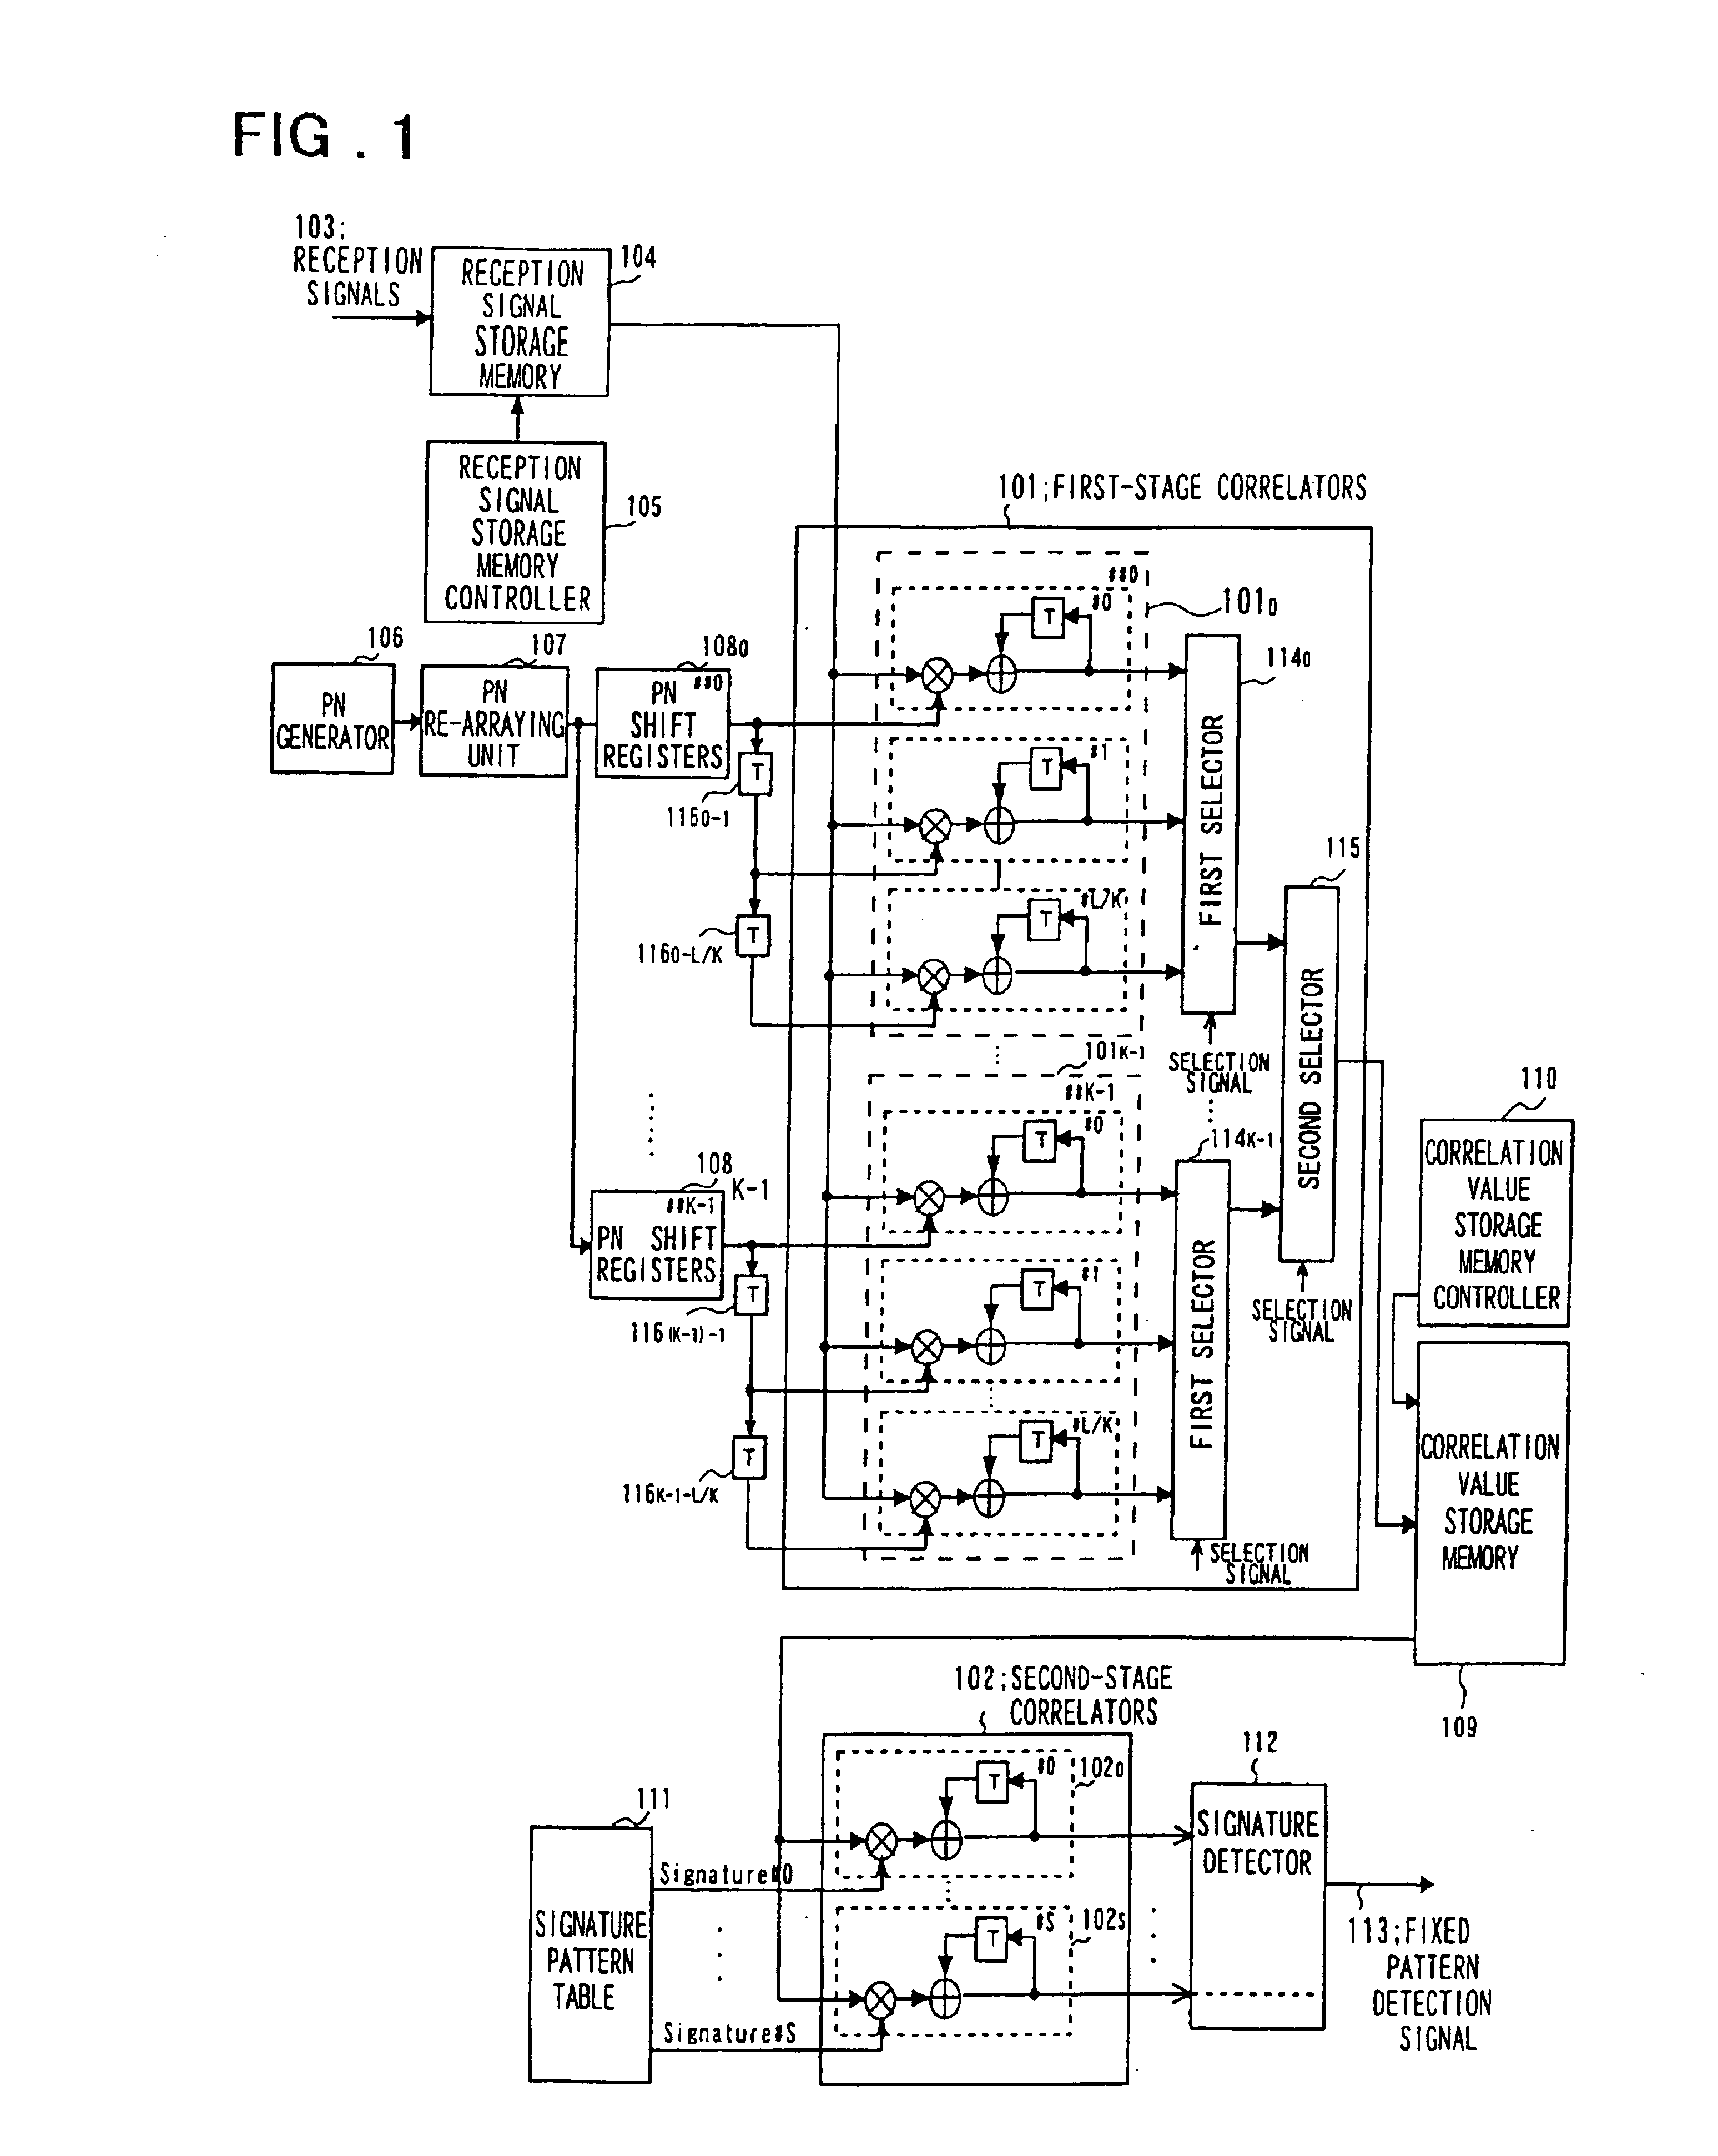 Fixed pattern detection apparatus